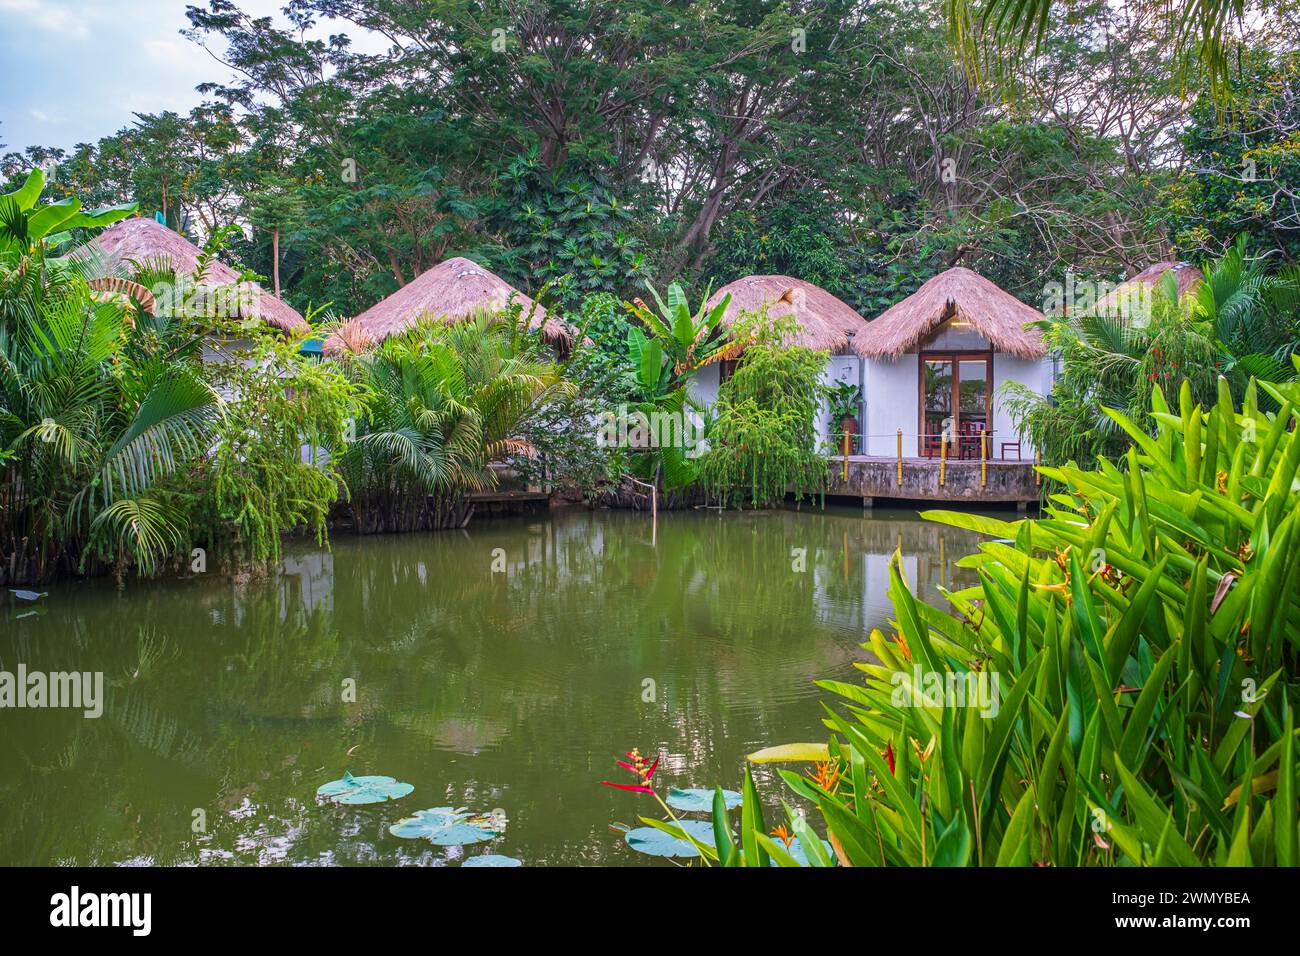 Vietnam, Mekong Delta, Can Tho, Lua Nep restaurant on the banks of the Hau river Stock Photo